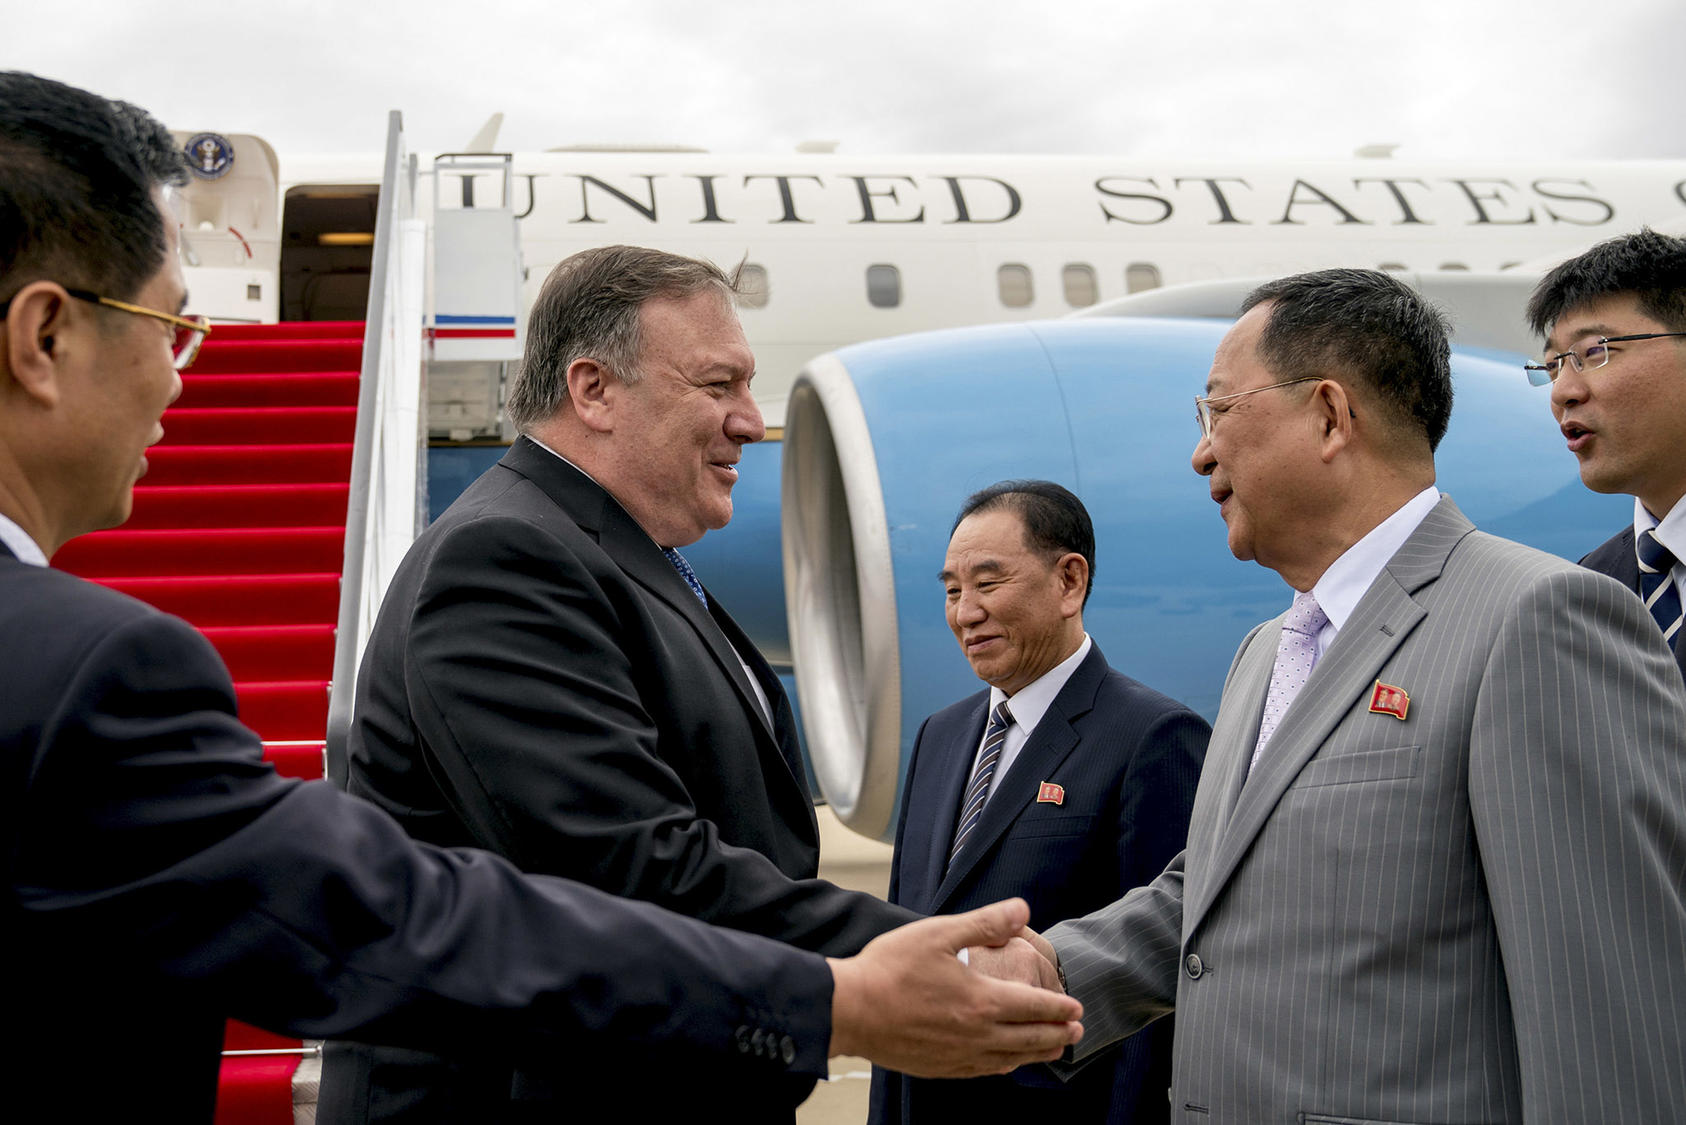 Secretary of State Mike Pompeo, second from left, meets Foreign Minister Ri Yong Ho and other North Korean officials at the airport in Pyongyang, North Korea, July 6, 2018. (Andrew Harnik/ The New York Times)